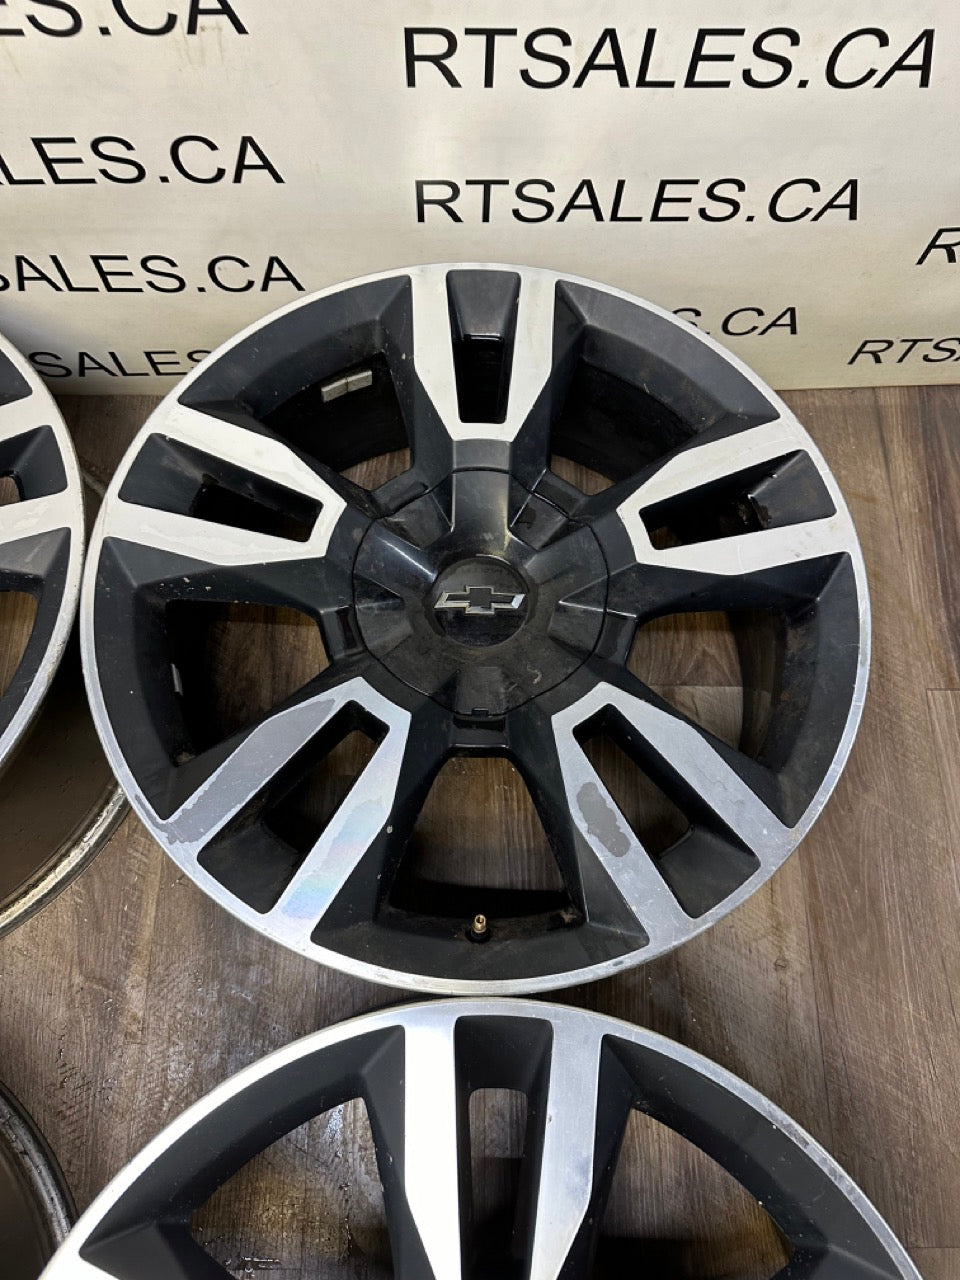 22x9 CHEVY FACTORY OEM Rims 6x139.7 (Used)